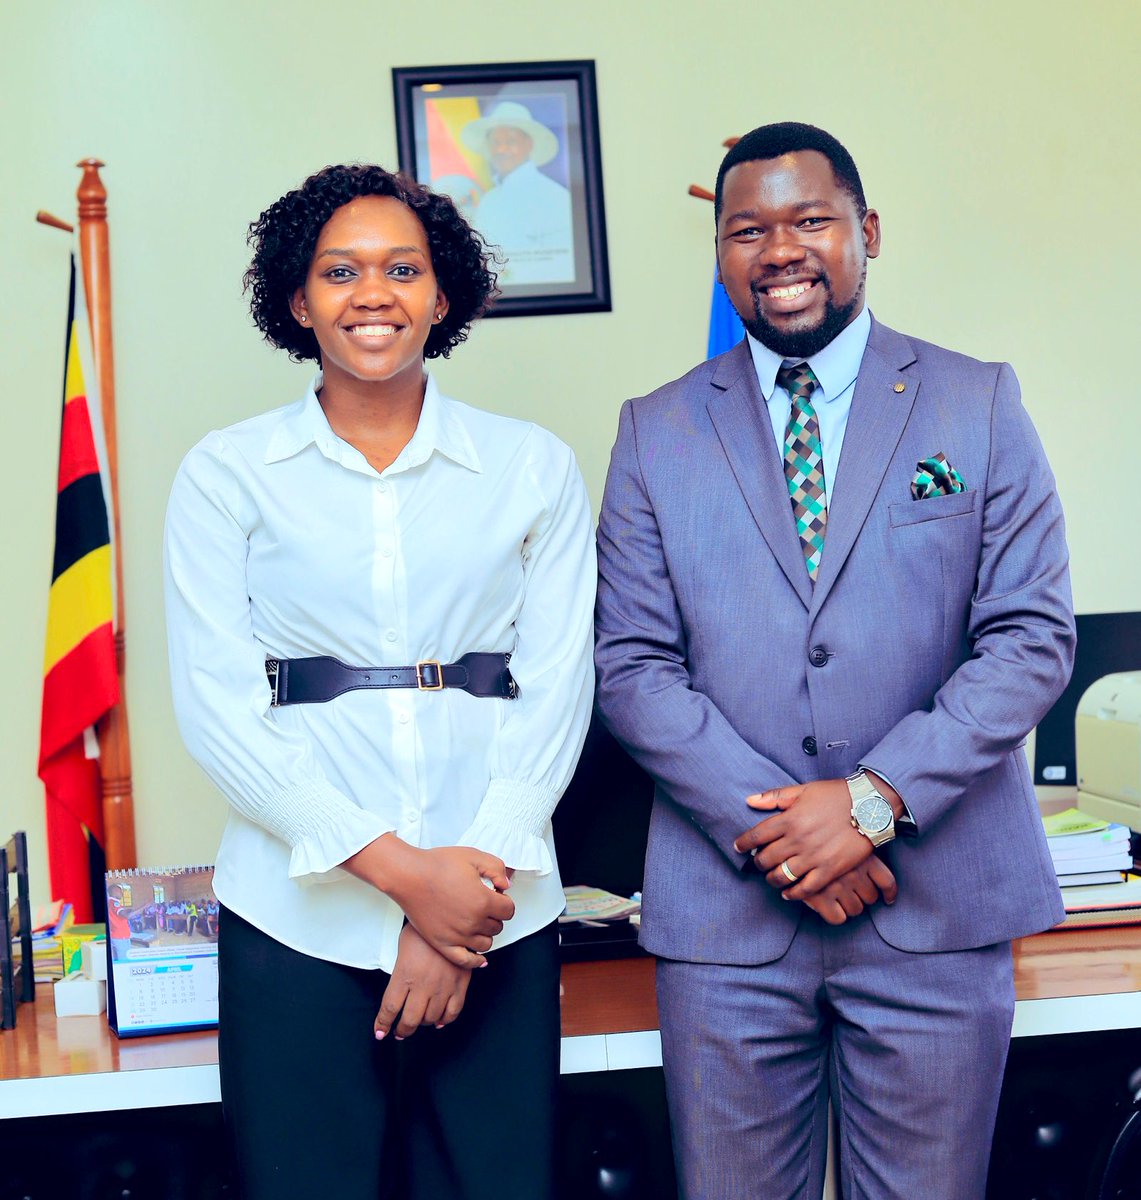 Passed by Hon. Minister @PNyamutoro’s office on Tuesday to discuss how her new presence can mean more engagement and enhancement for innovation for youth within the Energy and Minerals sector. Our smiles are passed down from the nilotic bloodlines of the forefathers.